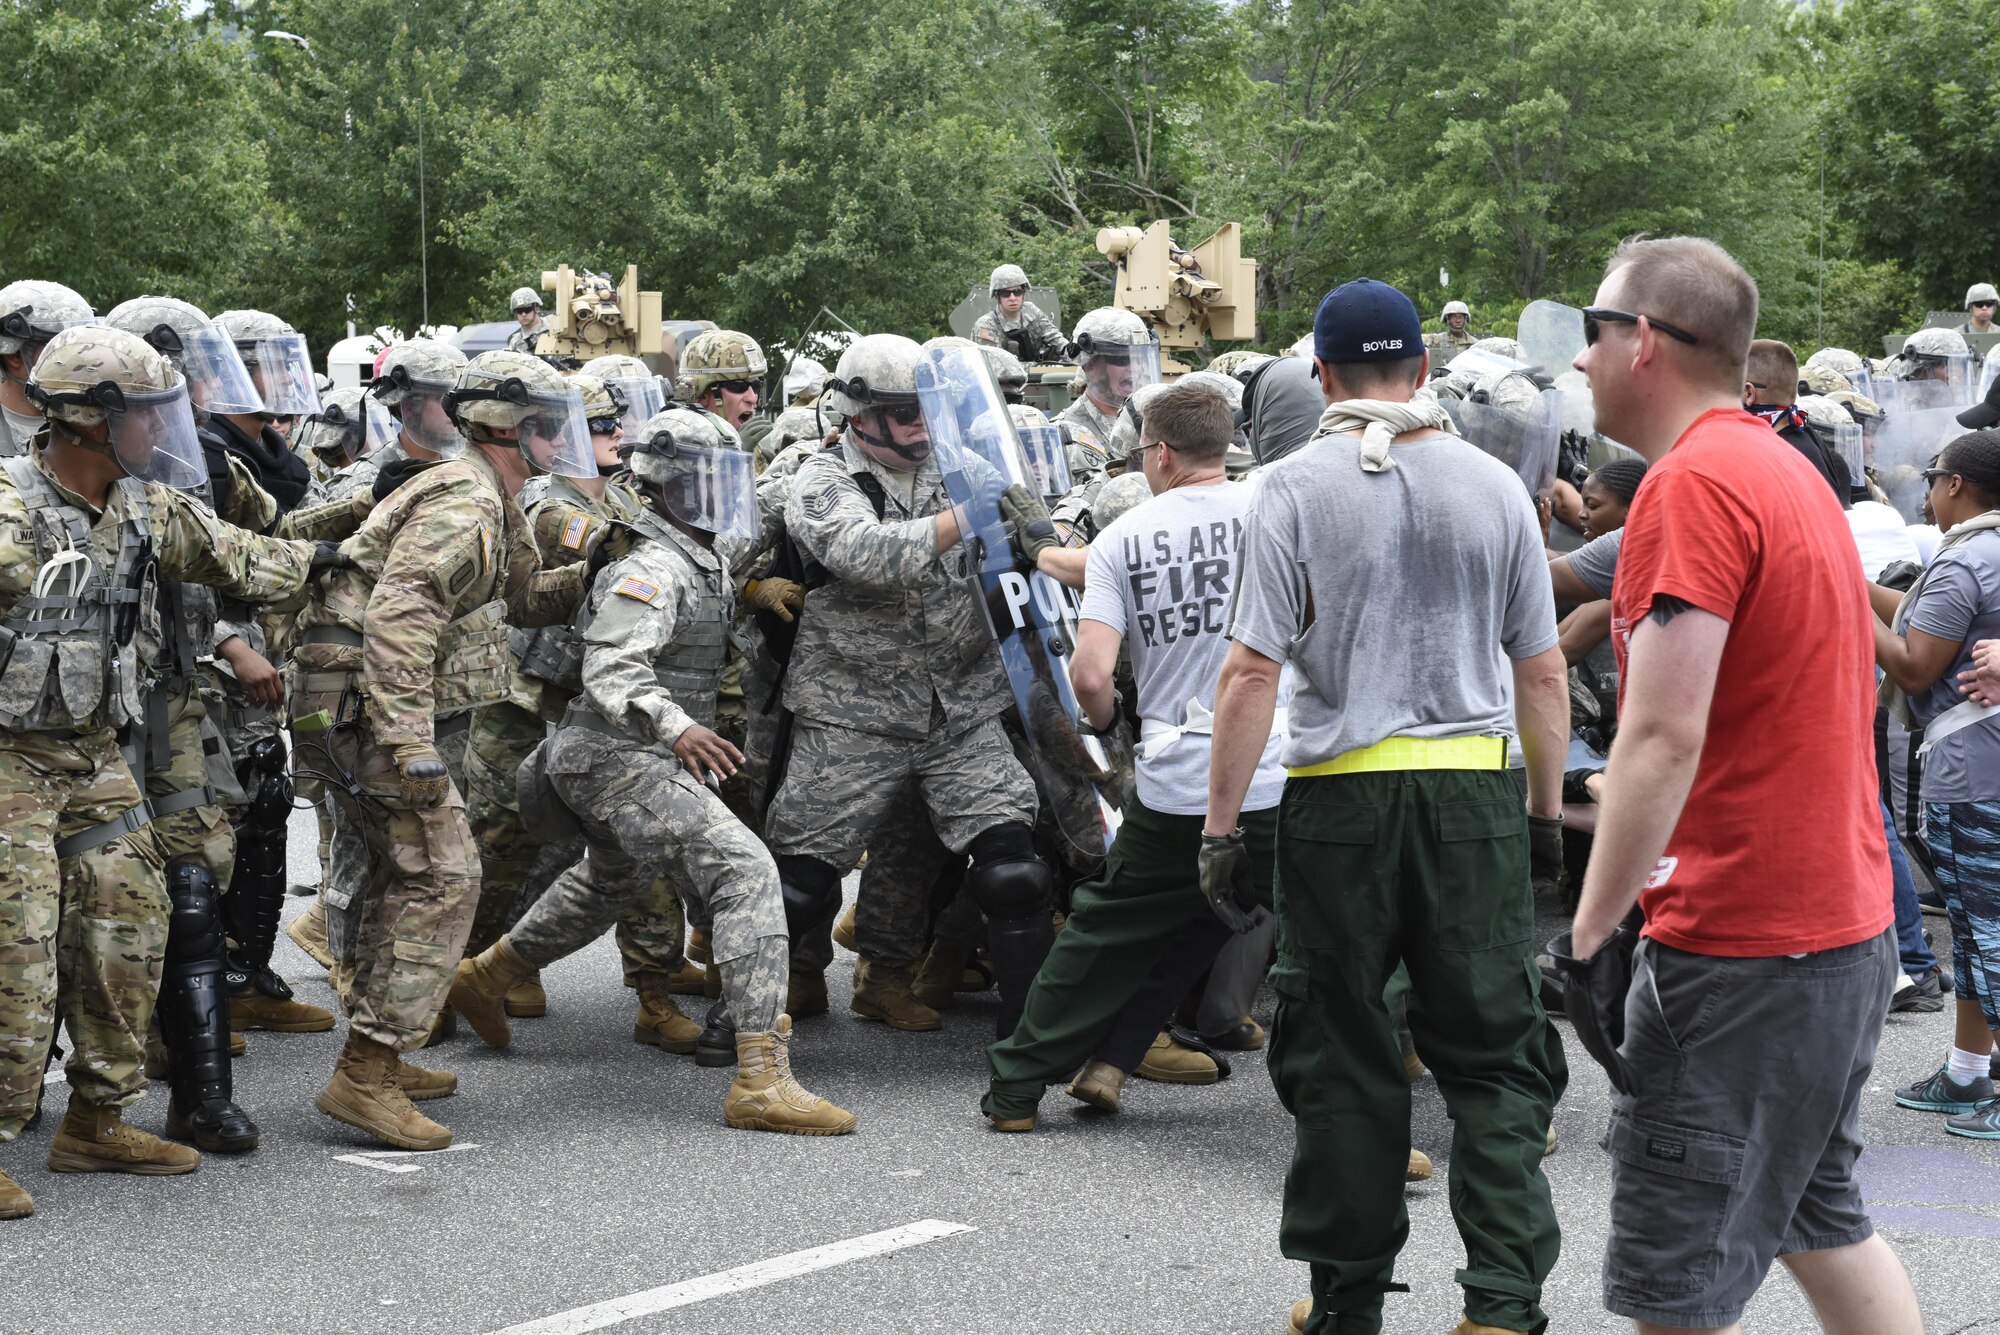 U.S. Air Force Tech. Sgt. Shane Johnson holds back mock protestors at a simulated riot for Vigilant Catamount at Western Carolina University, Cullowhee North Carolina, June 13, 2017. Vigilant Catamount is a mulitday, multi-agency training exercise ending with simulated riot at Western Carolina University, involving Army National Guard Military police and the 145th Airlift Wing Security Forces.